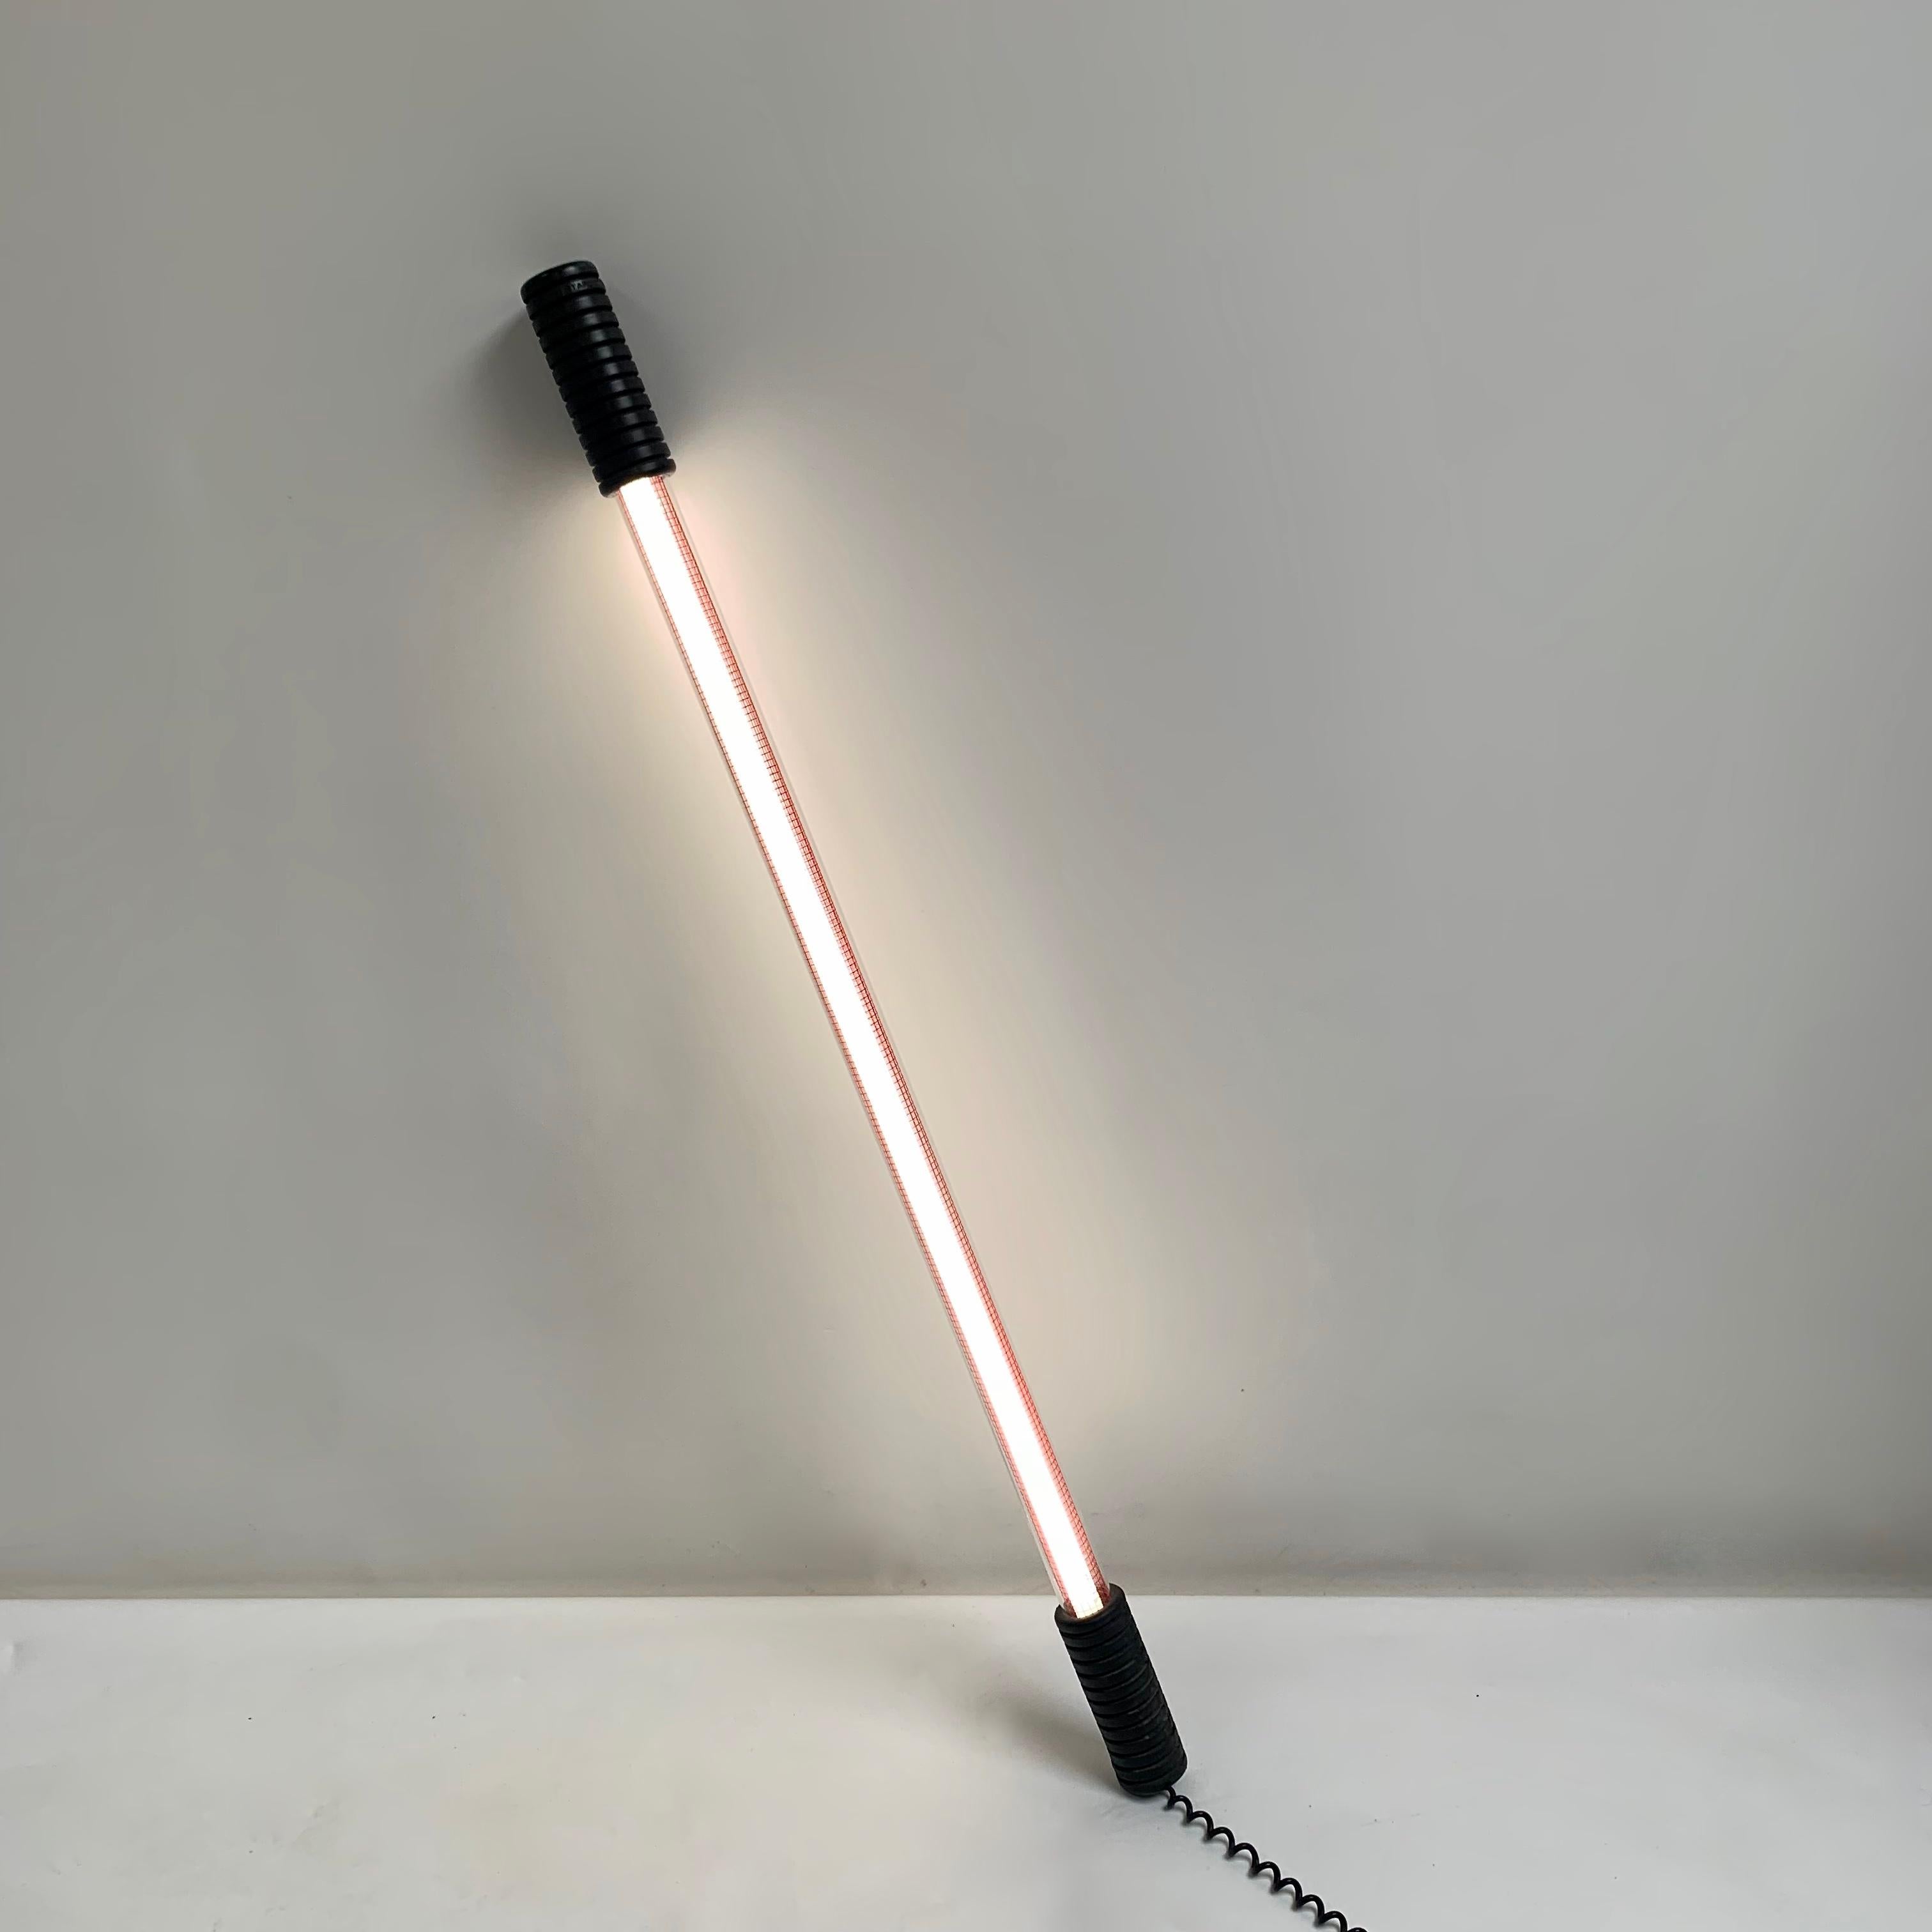 Rare Philippe Starck Easylight model floor lamp for Electrorama, circa 1980, France.
Stamped Starck product. First edition.
The lamp lights on and off by tilting it, using mercury switch.
Fluorescent tube, polyurethane , polycarbonat tube,